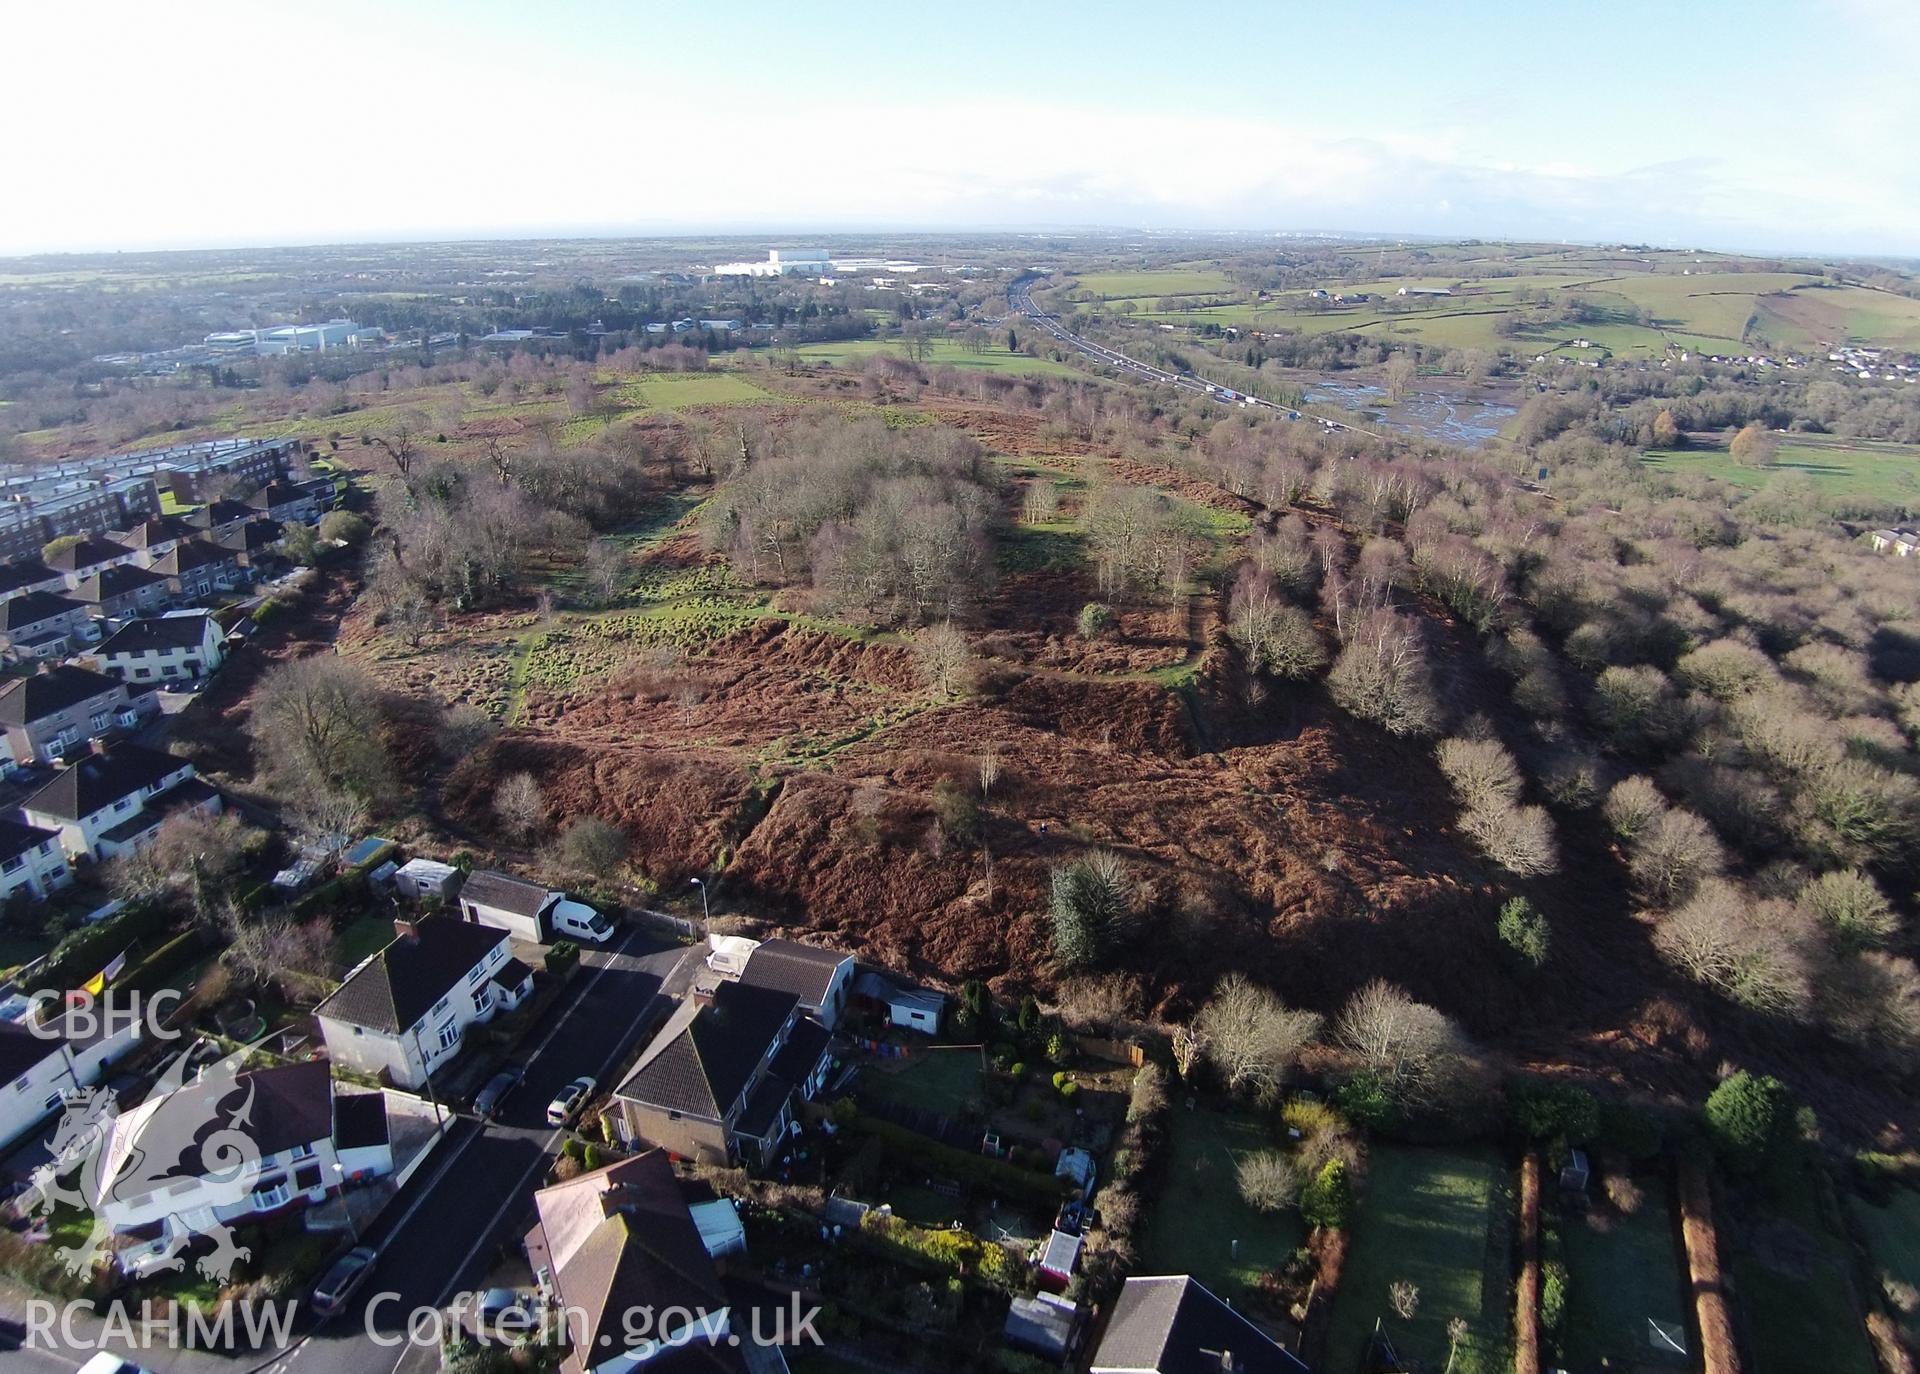 Colour aerial photo showing Tredegar Fort, taken by Paul R. Davis,  4th March 2016.